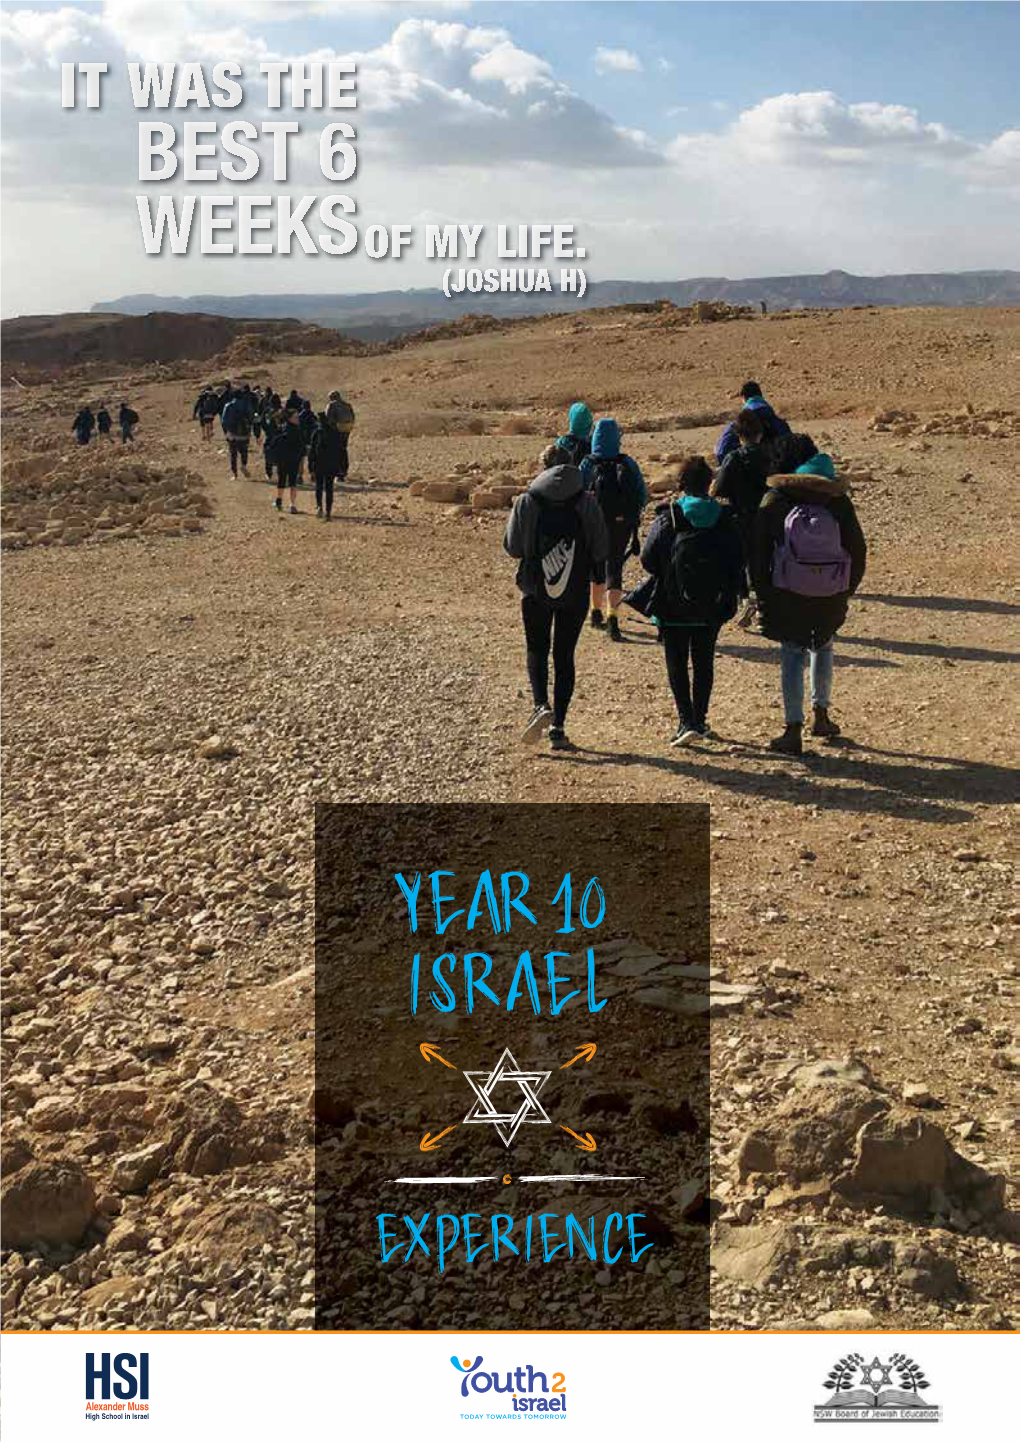 Year 10 Israel Experience